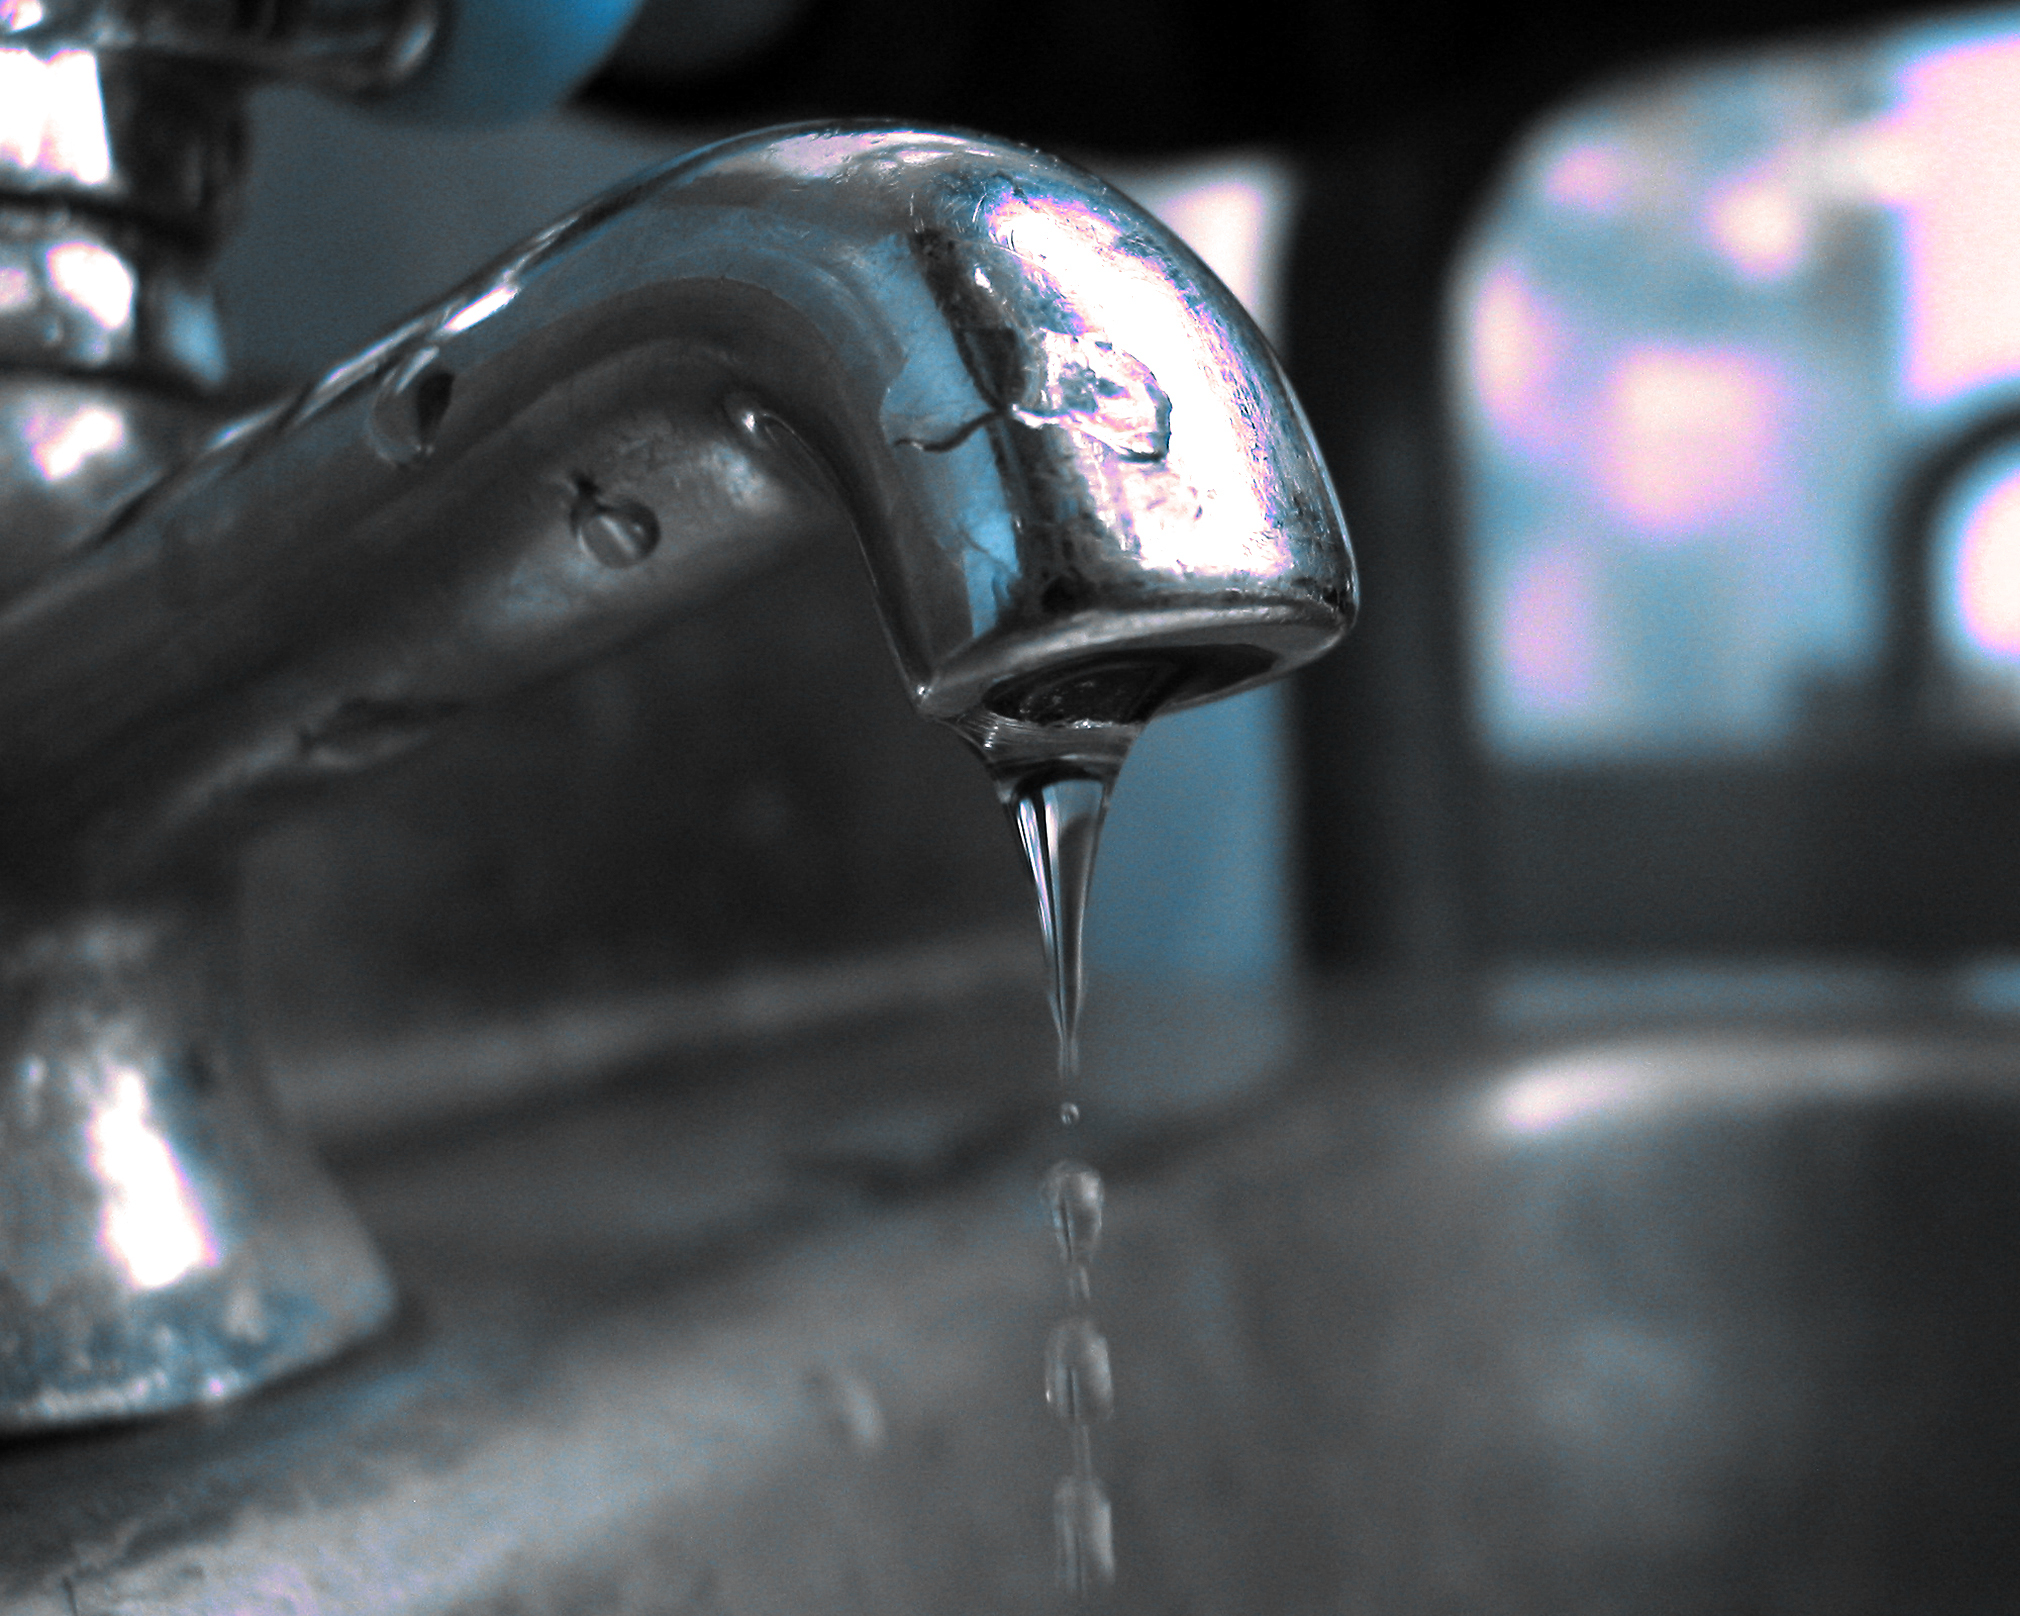 Water Dripping from Faucet: Why and How to Fix